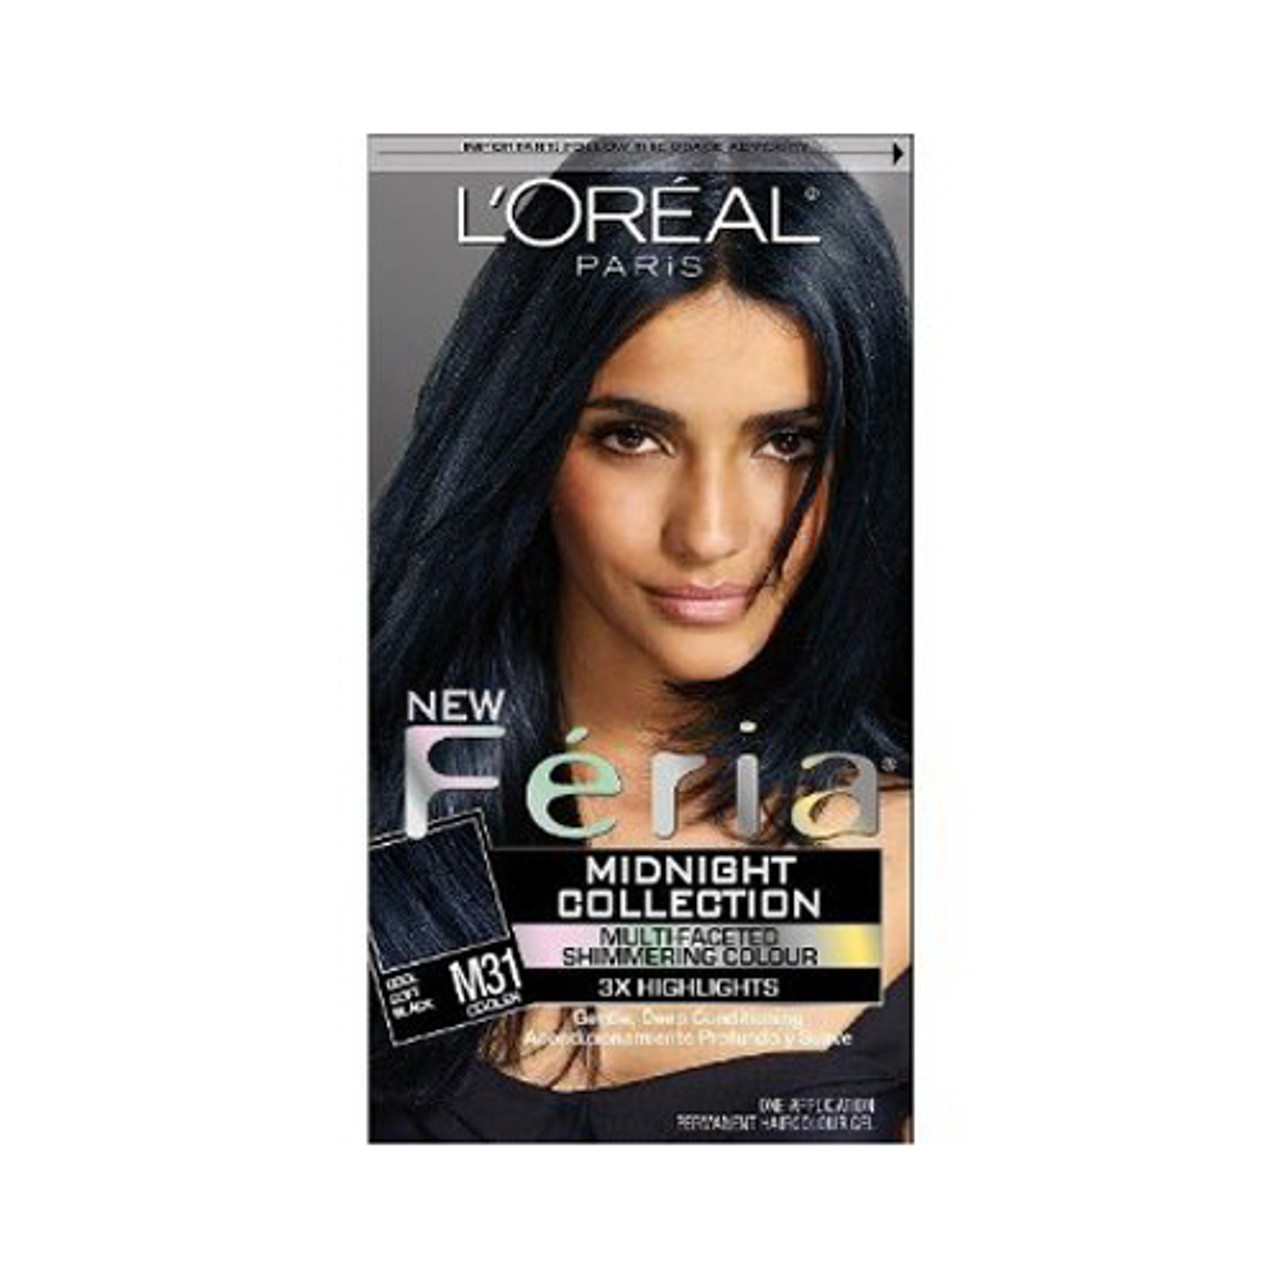 Loreal Paris Feria Midnight Collection Hair Color, Cool Soft Black - 1 Kit  